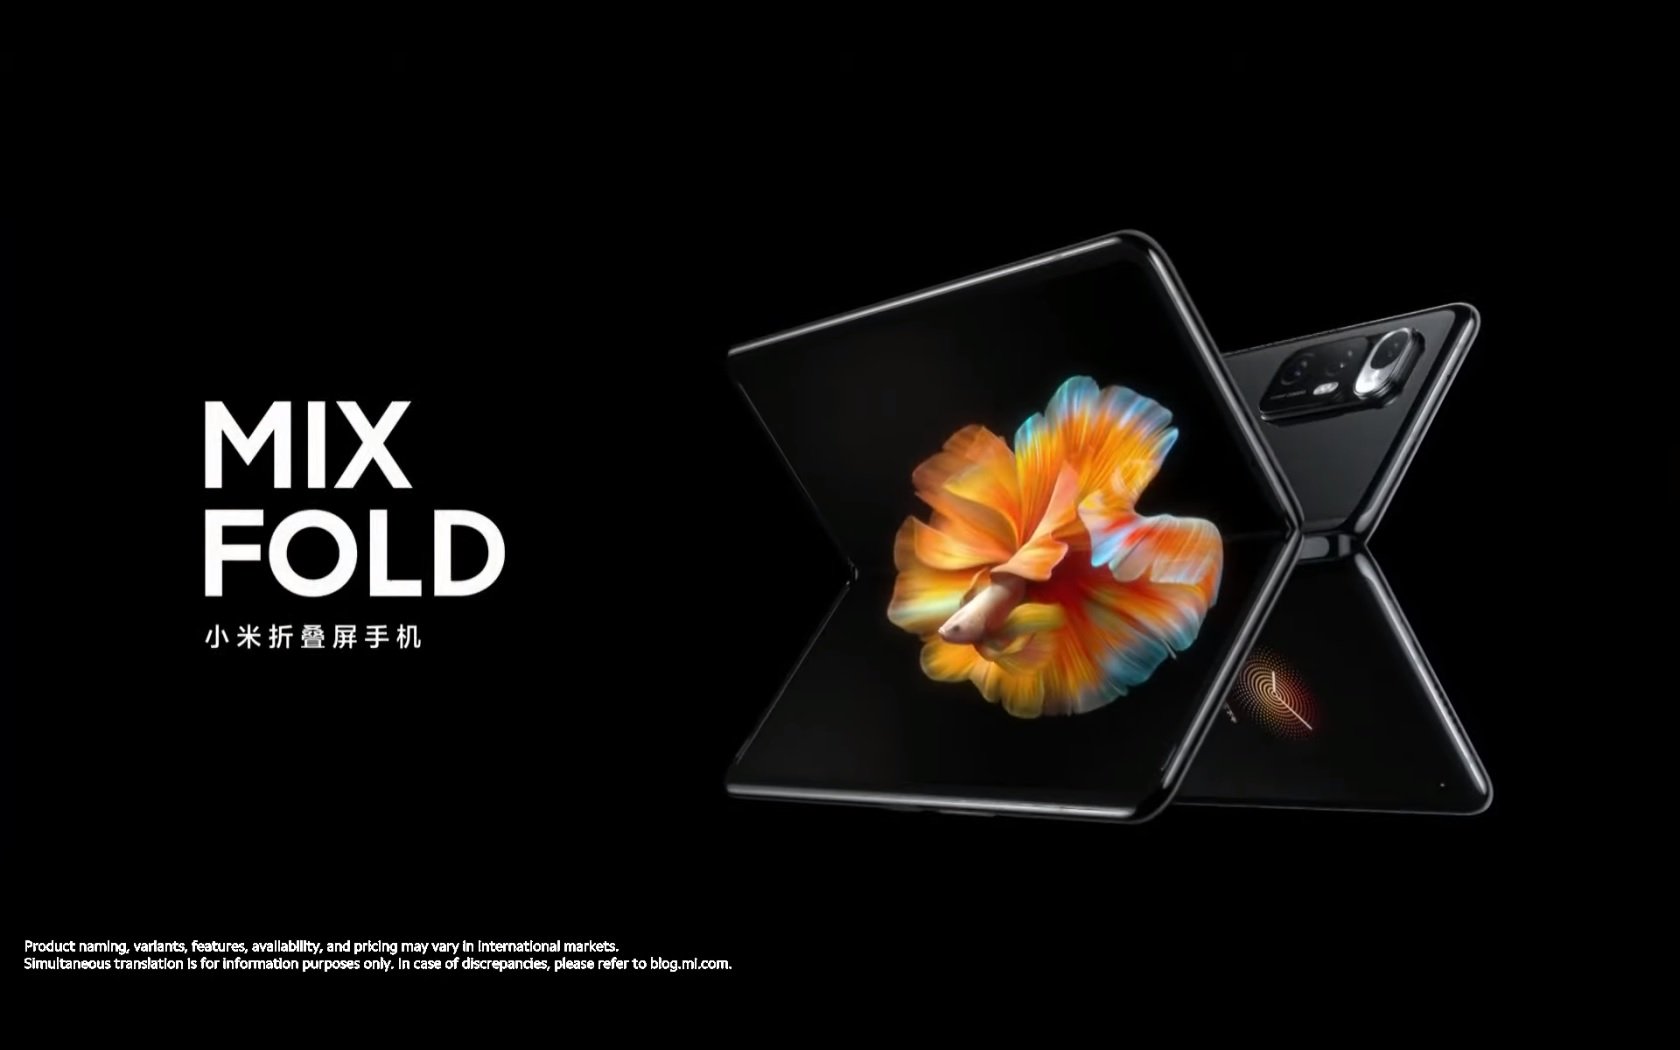 Xiaomi foldable file is available here